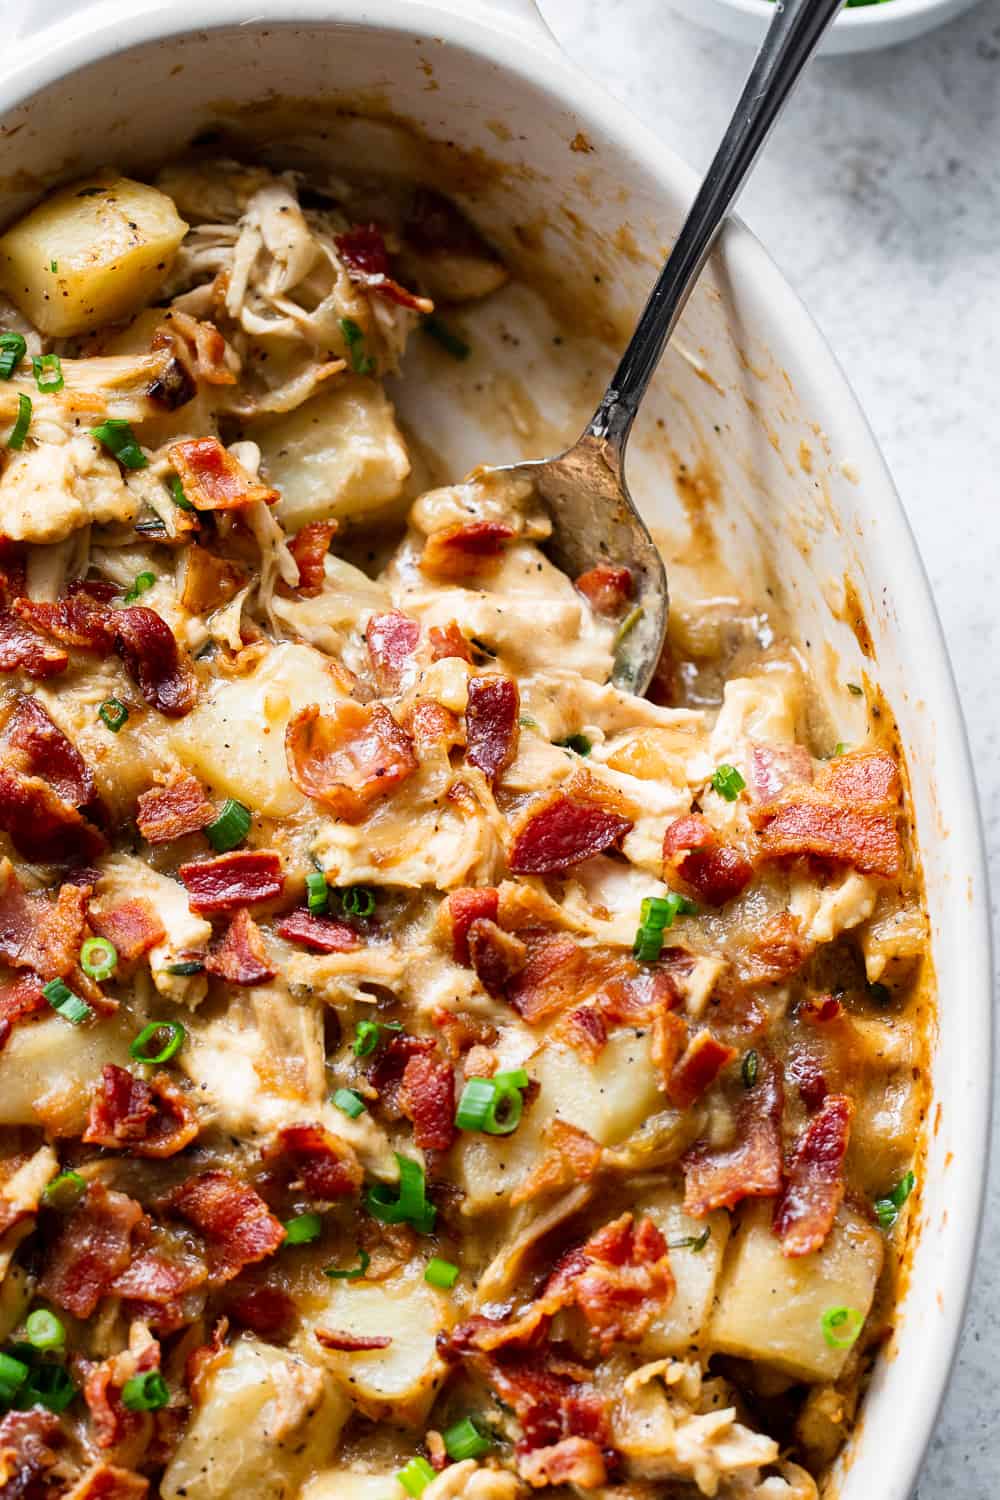 This savory creamy chicken potato casserole is the perfect healthy comfort food for cold winter nights! Hearty roasted potatoes are baked with chicken, bacon, and a creamy sauce that you won’t believe is dairy free. It’s kid approved, easy to make and the leftovers are perfect for a filling lunch the next day. It’s Whole30 compliant and paleo friendly. #paleo #whole30 #dairyfree #cleaneating